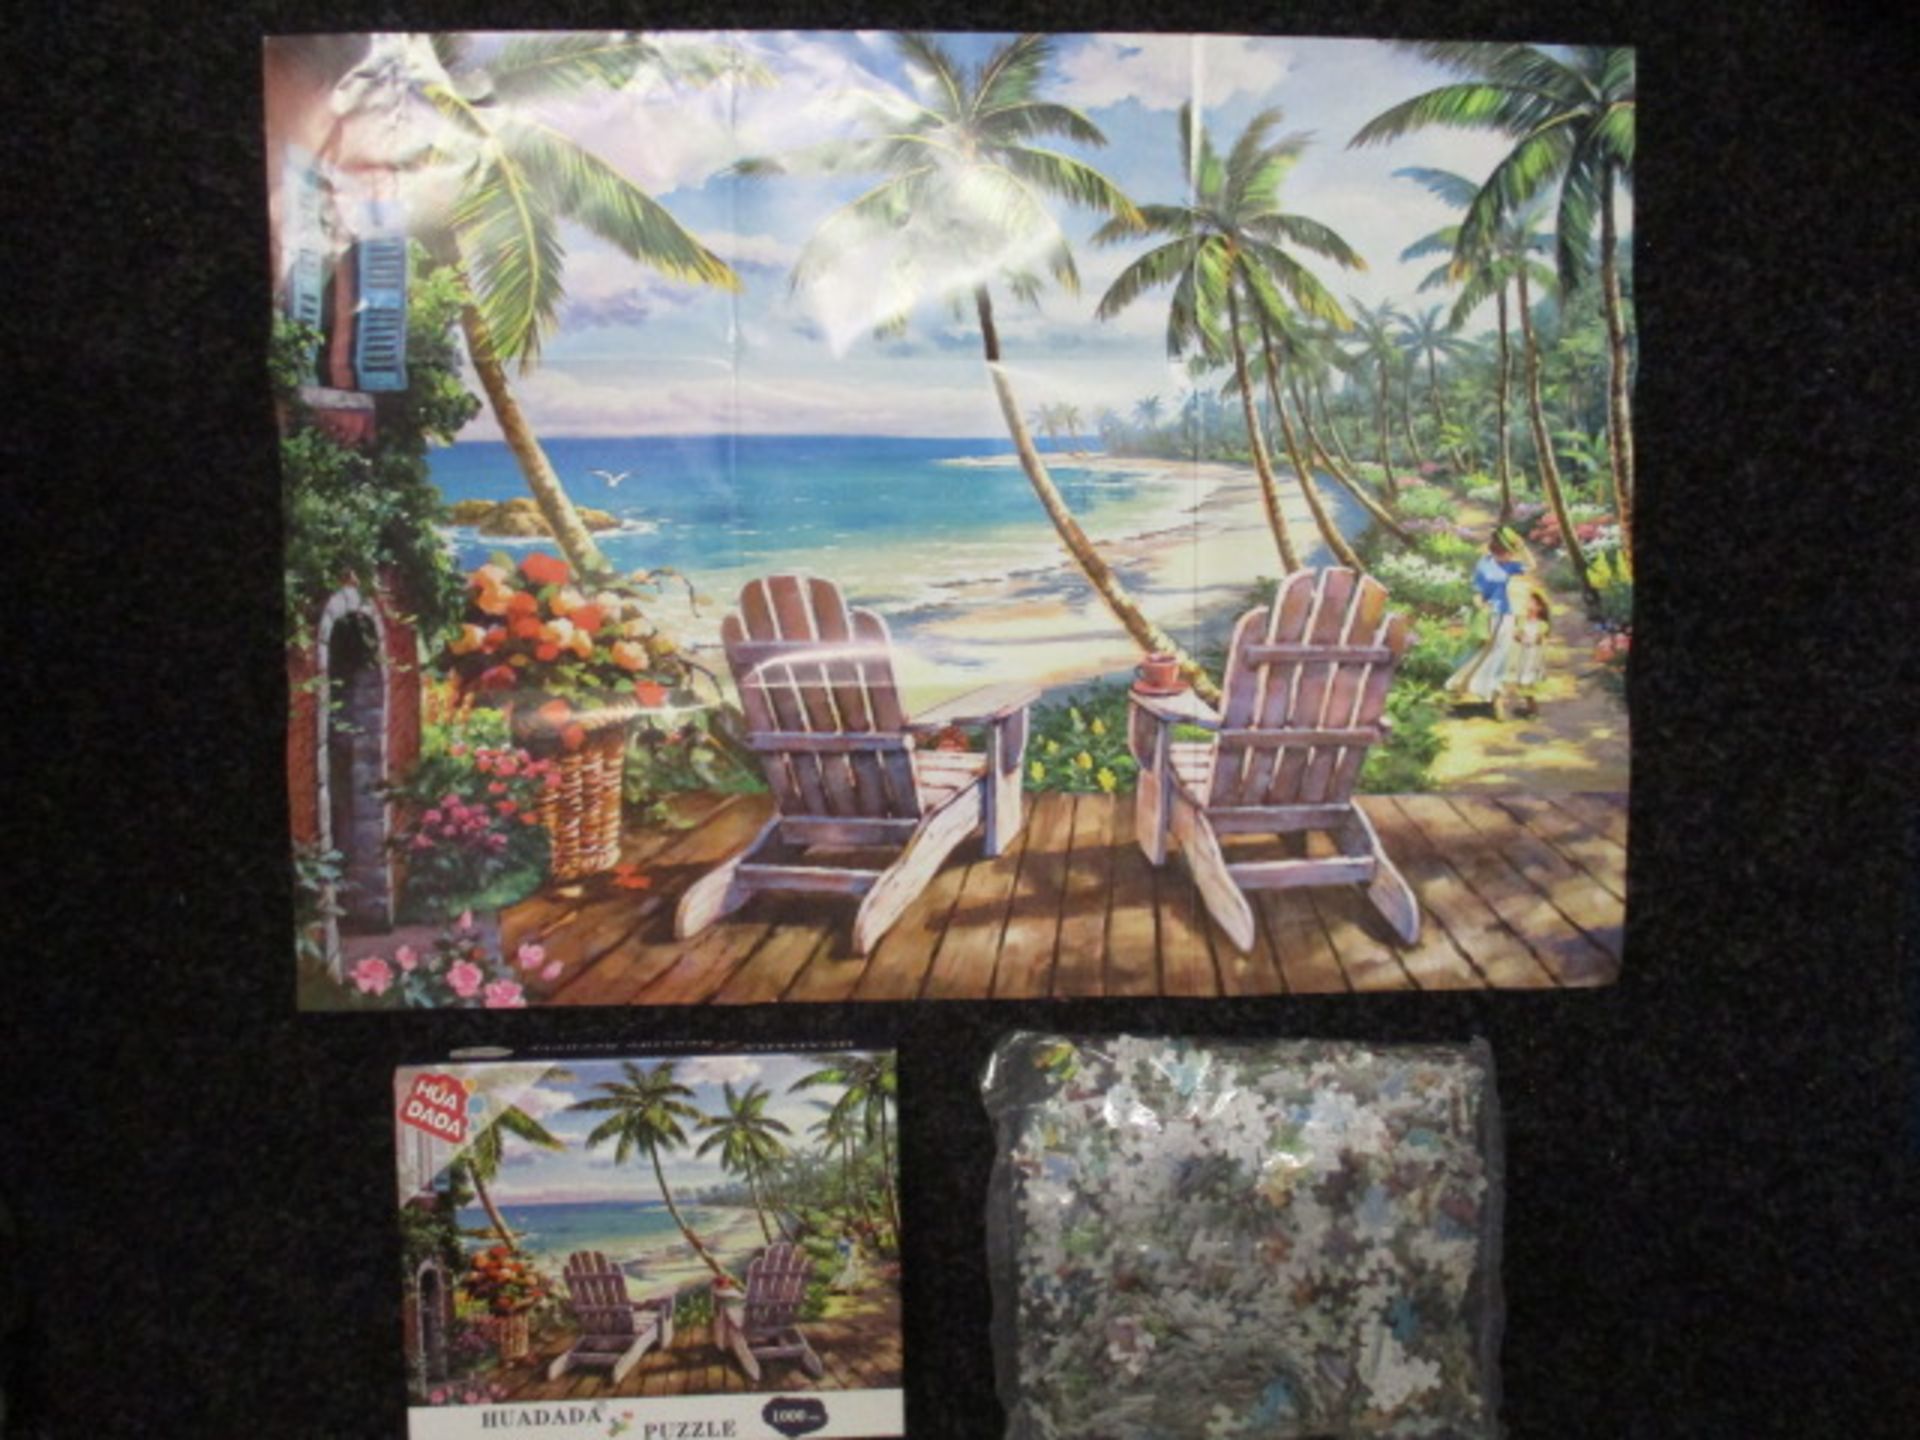 50 x Brand New 1000 pc Jigsaw w/ Guide and Poster | RRP £9.99 each